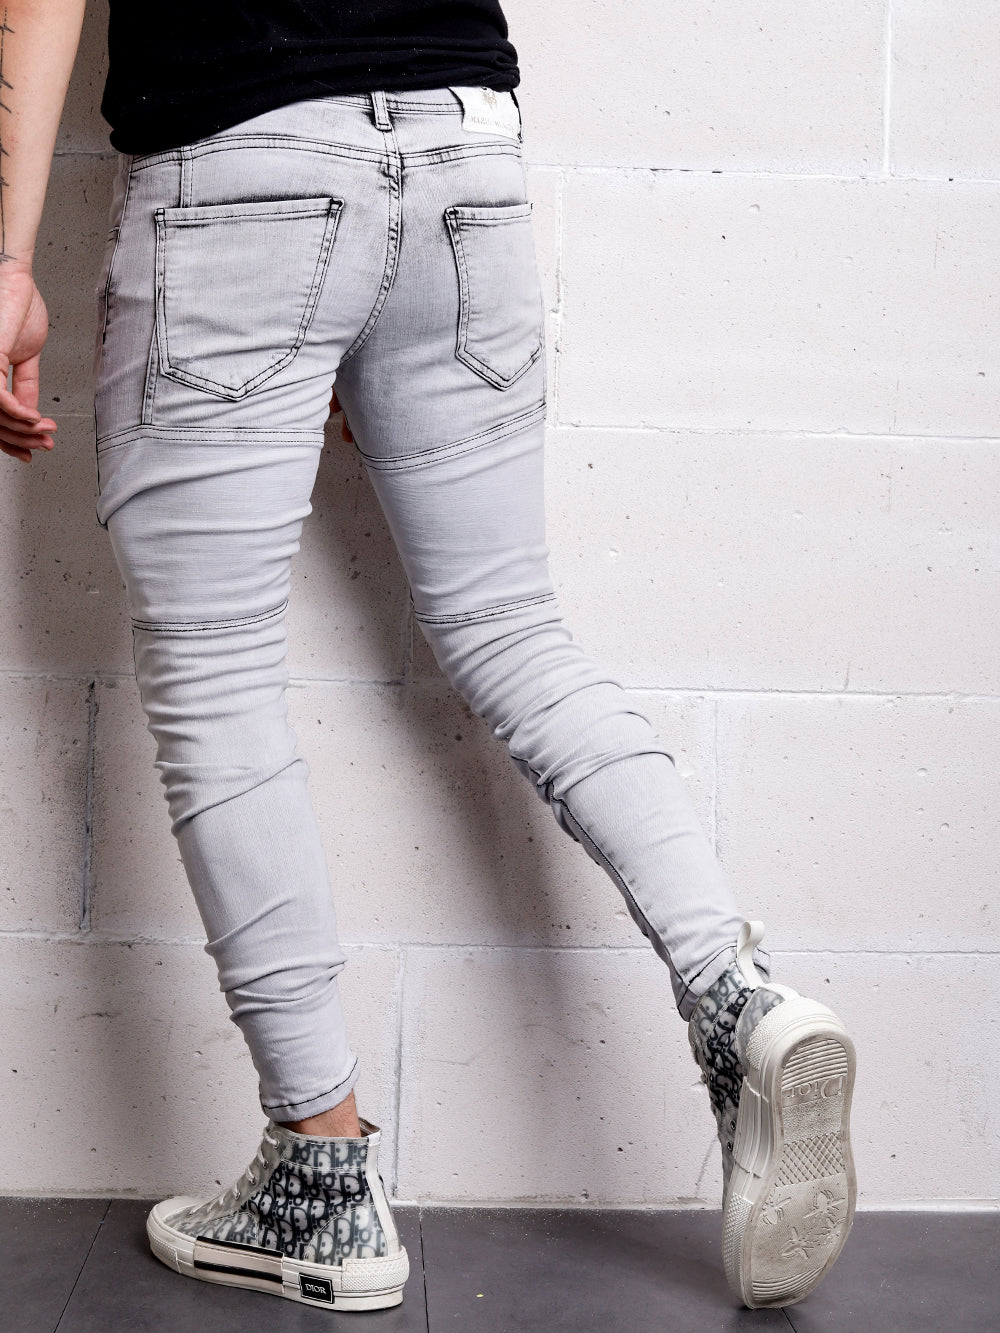 A man in CLOUD 9 distressed denim jeans leaning against a wall.